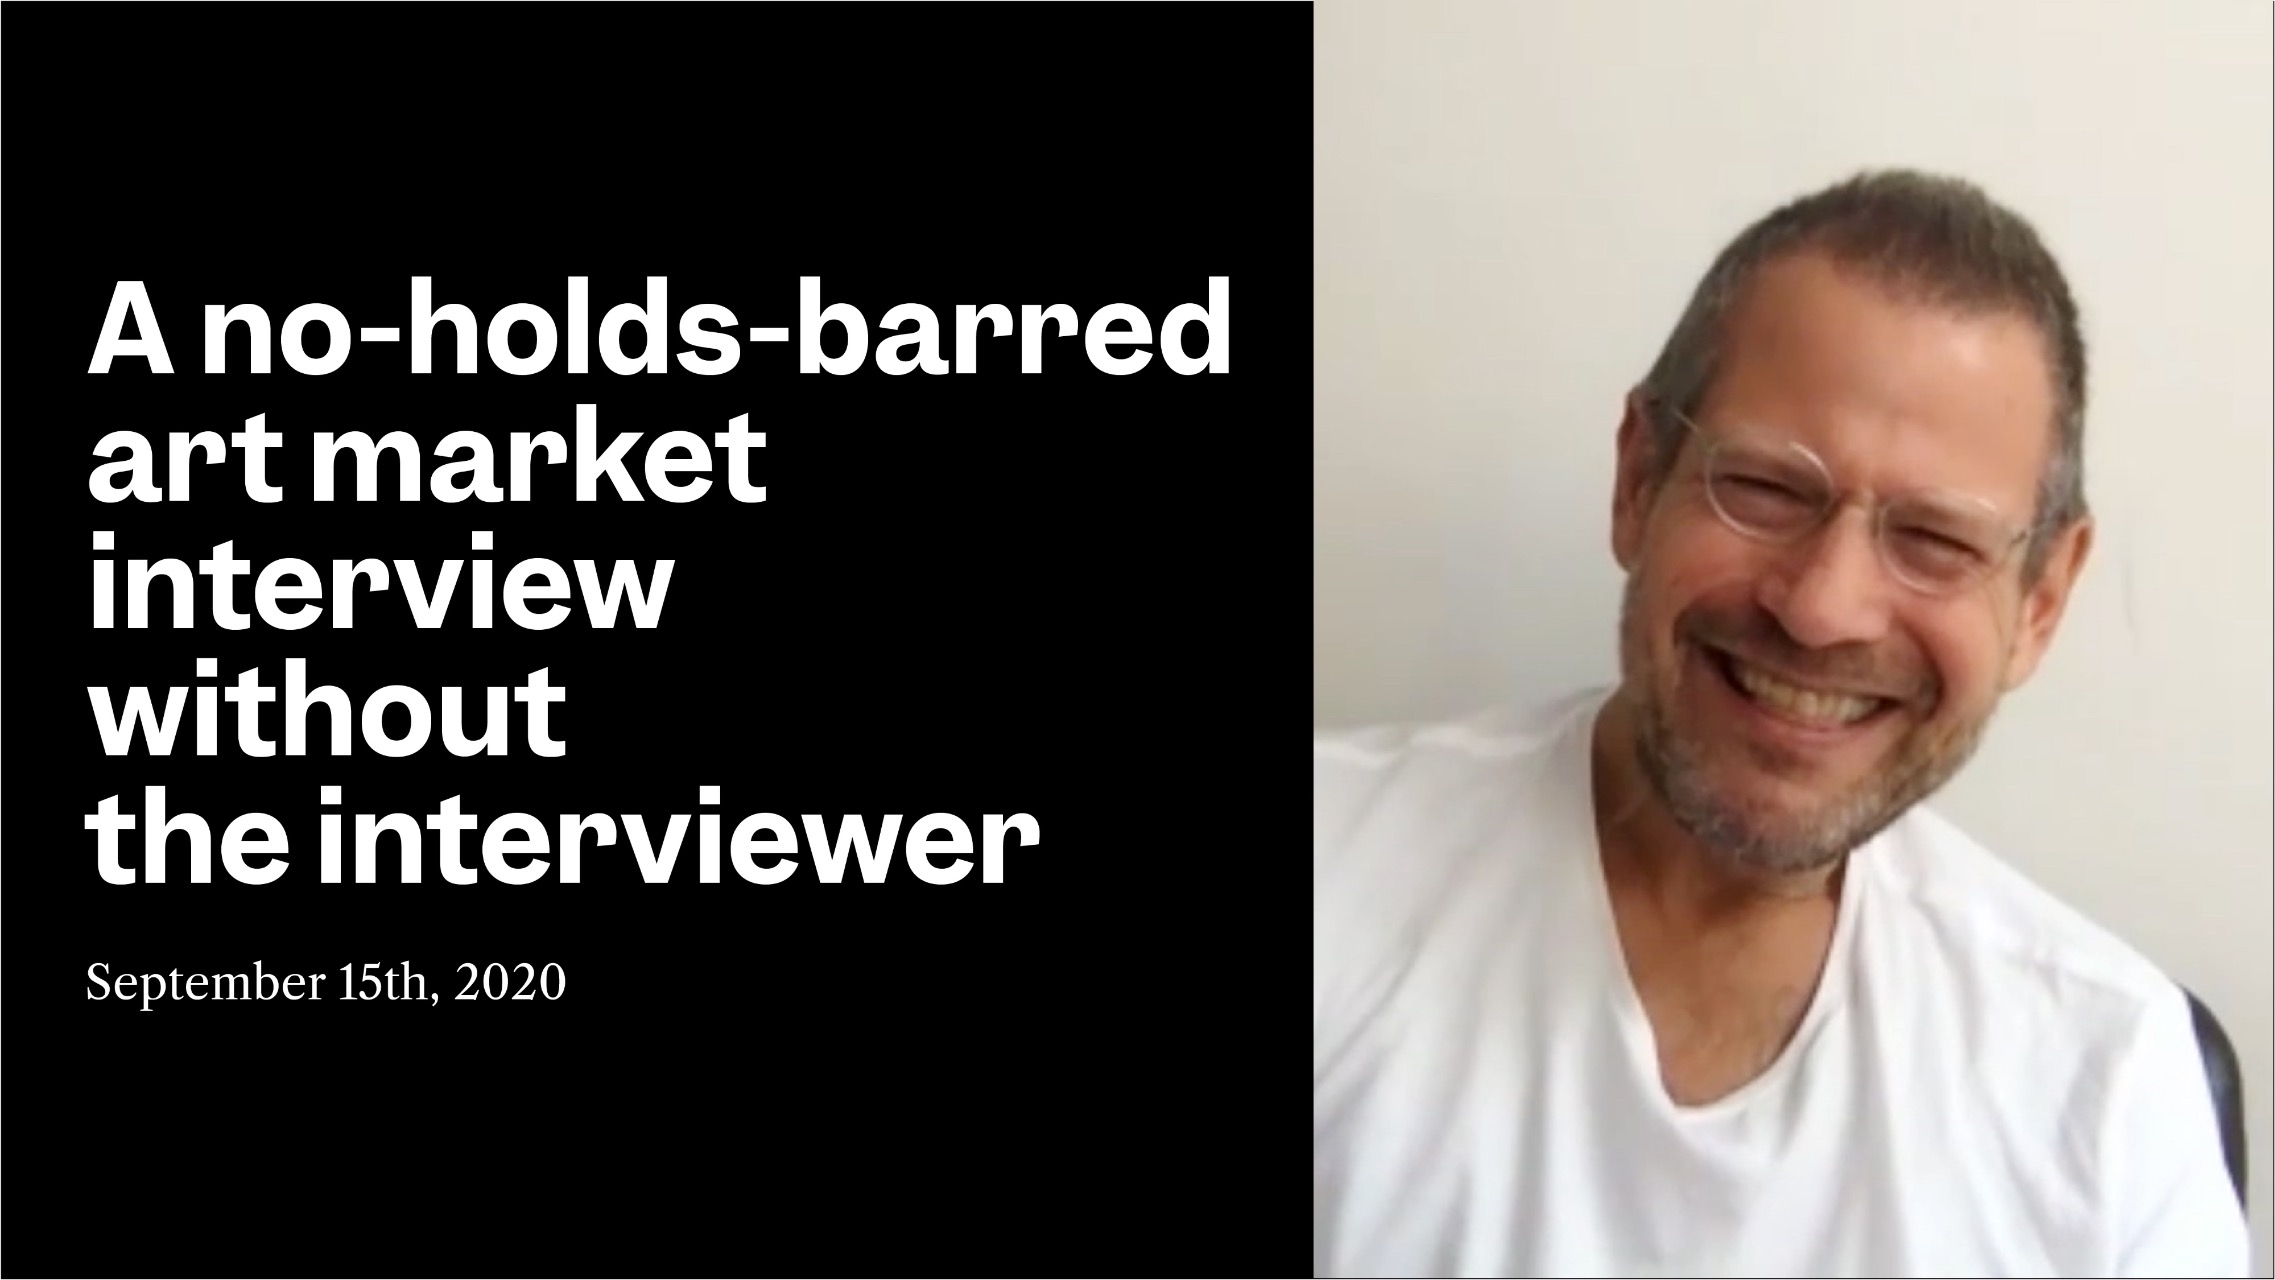 A no-holds-barred art market interview without the interviewer